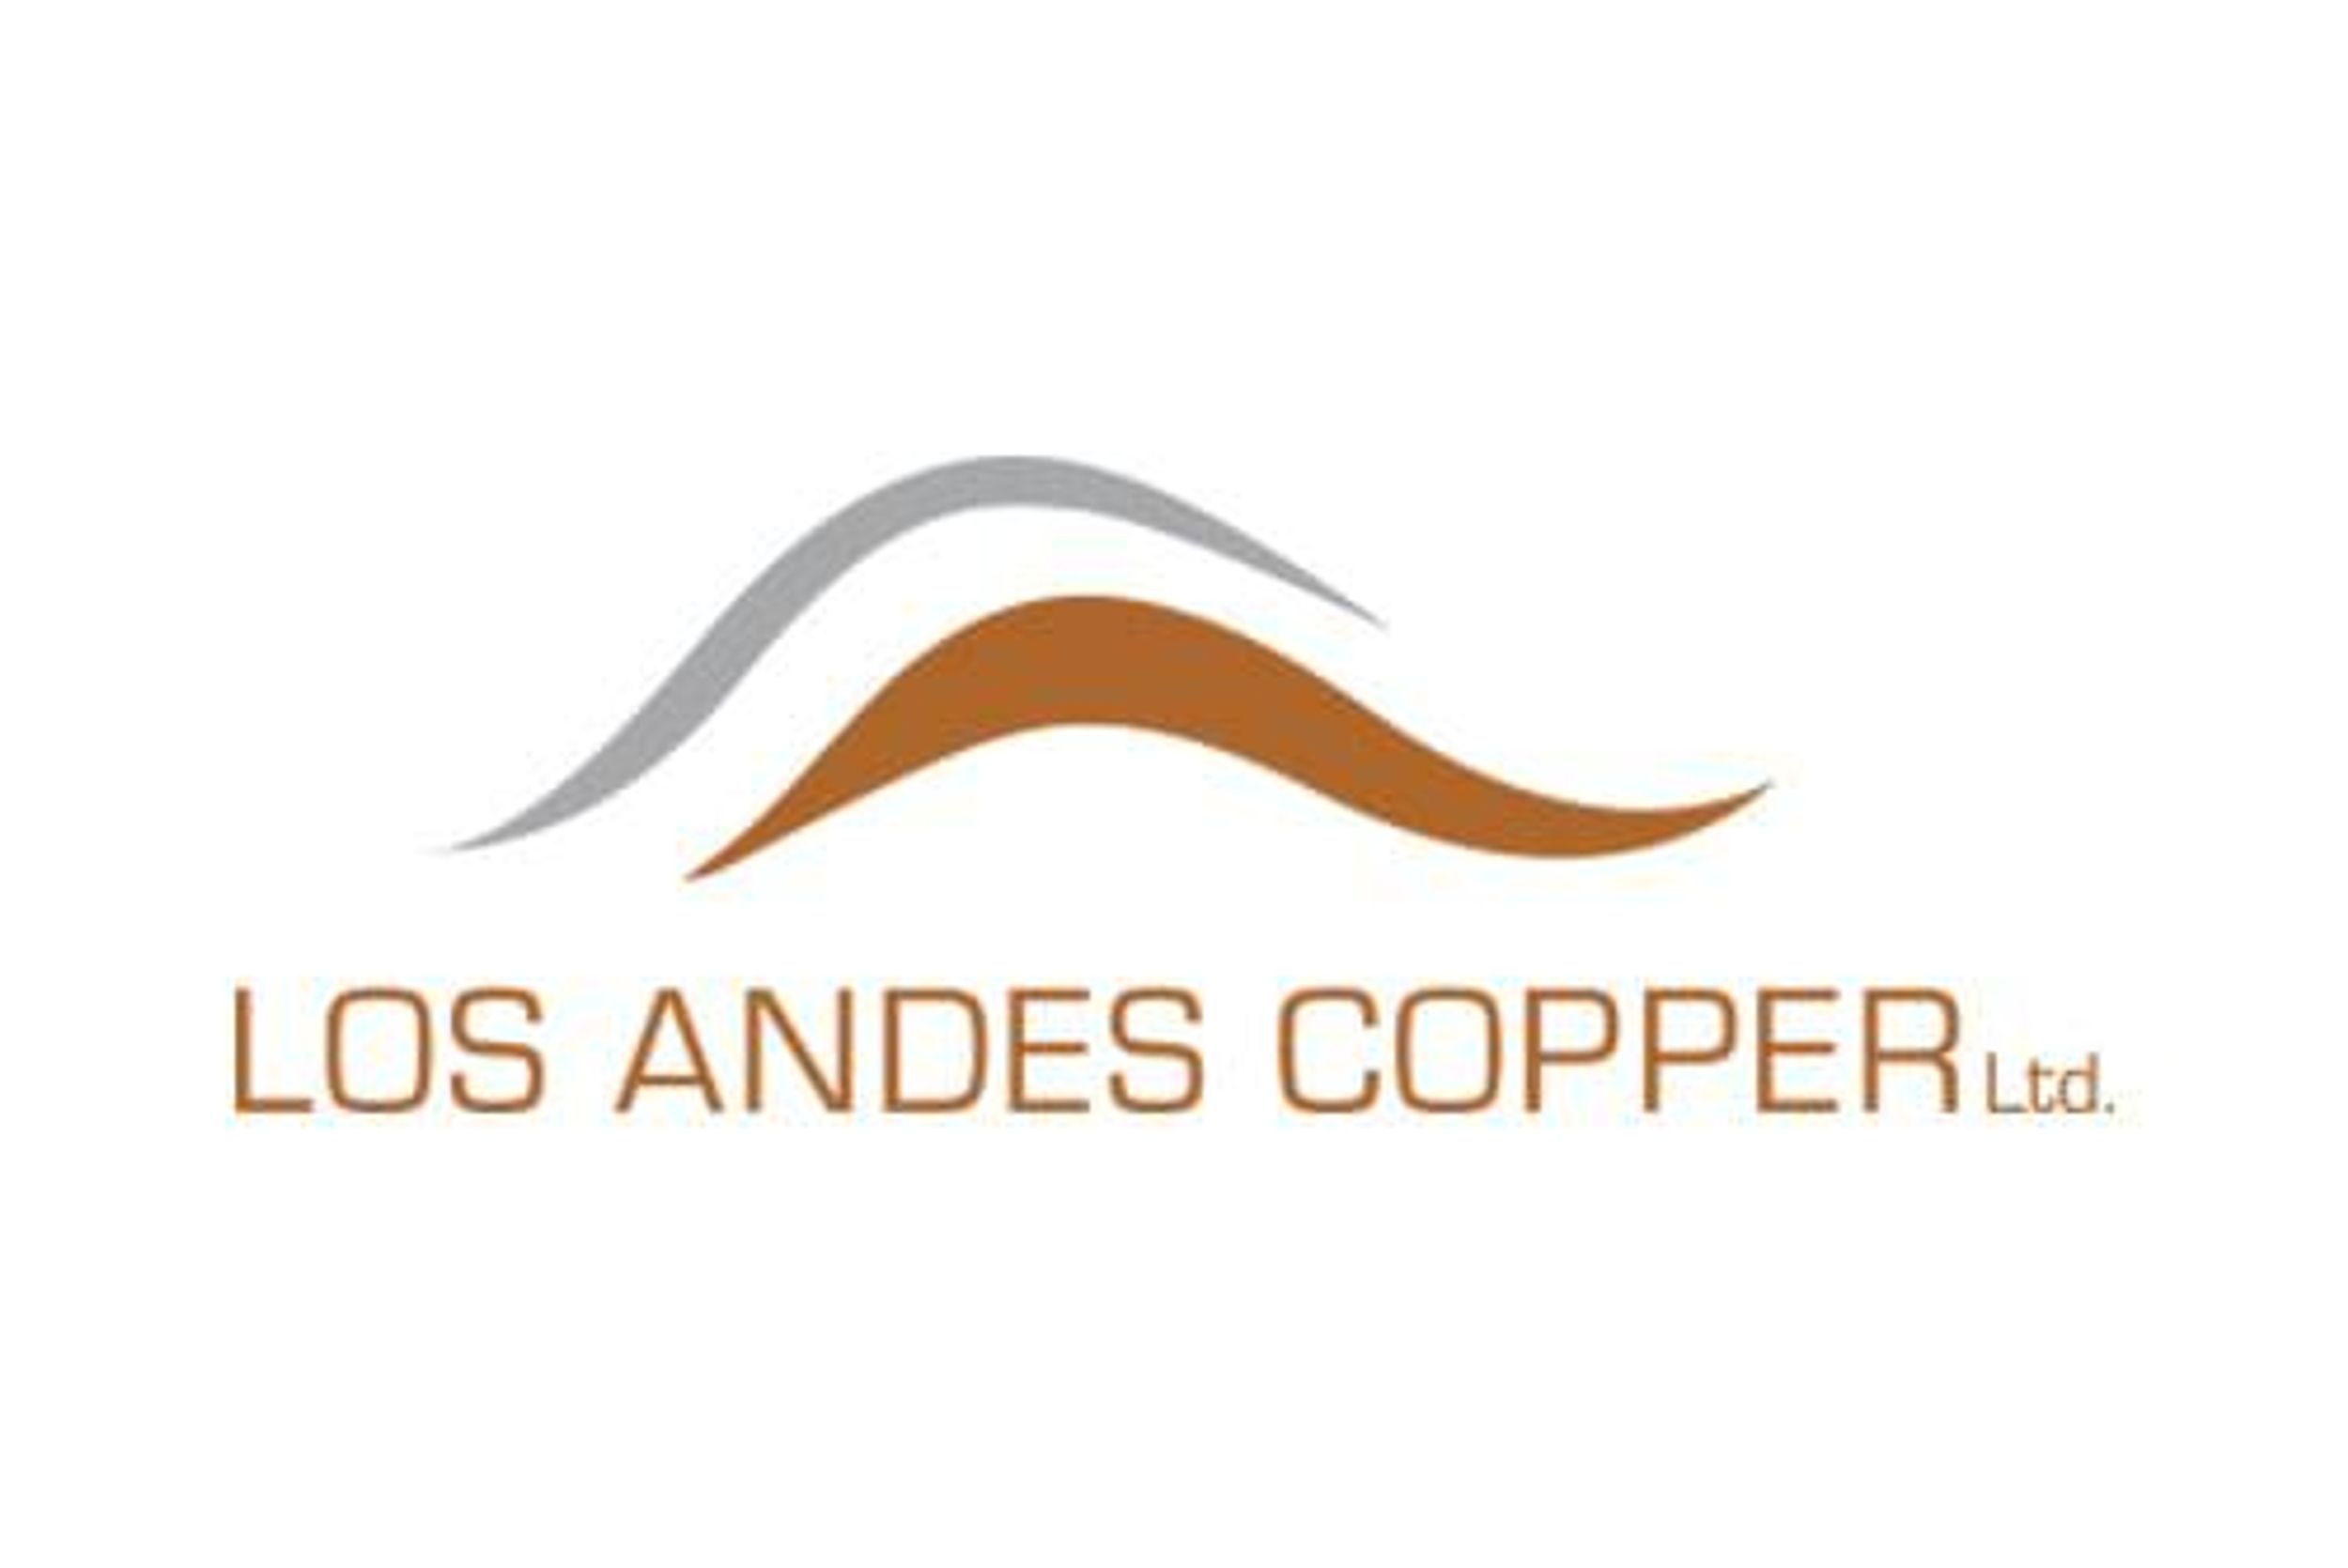 Los Andes Copper Announces Further Investment by Queen's Road Capital